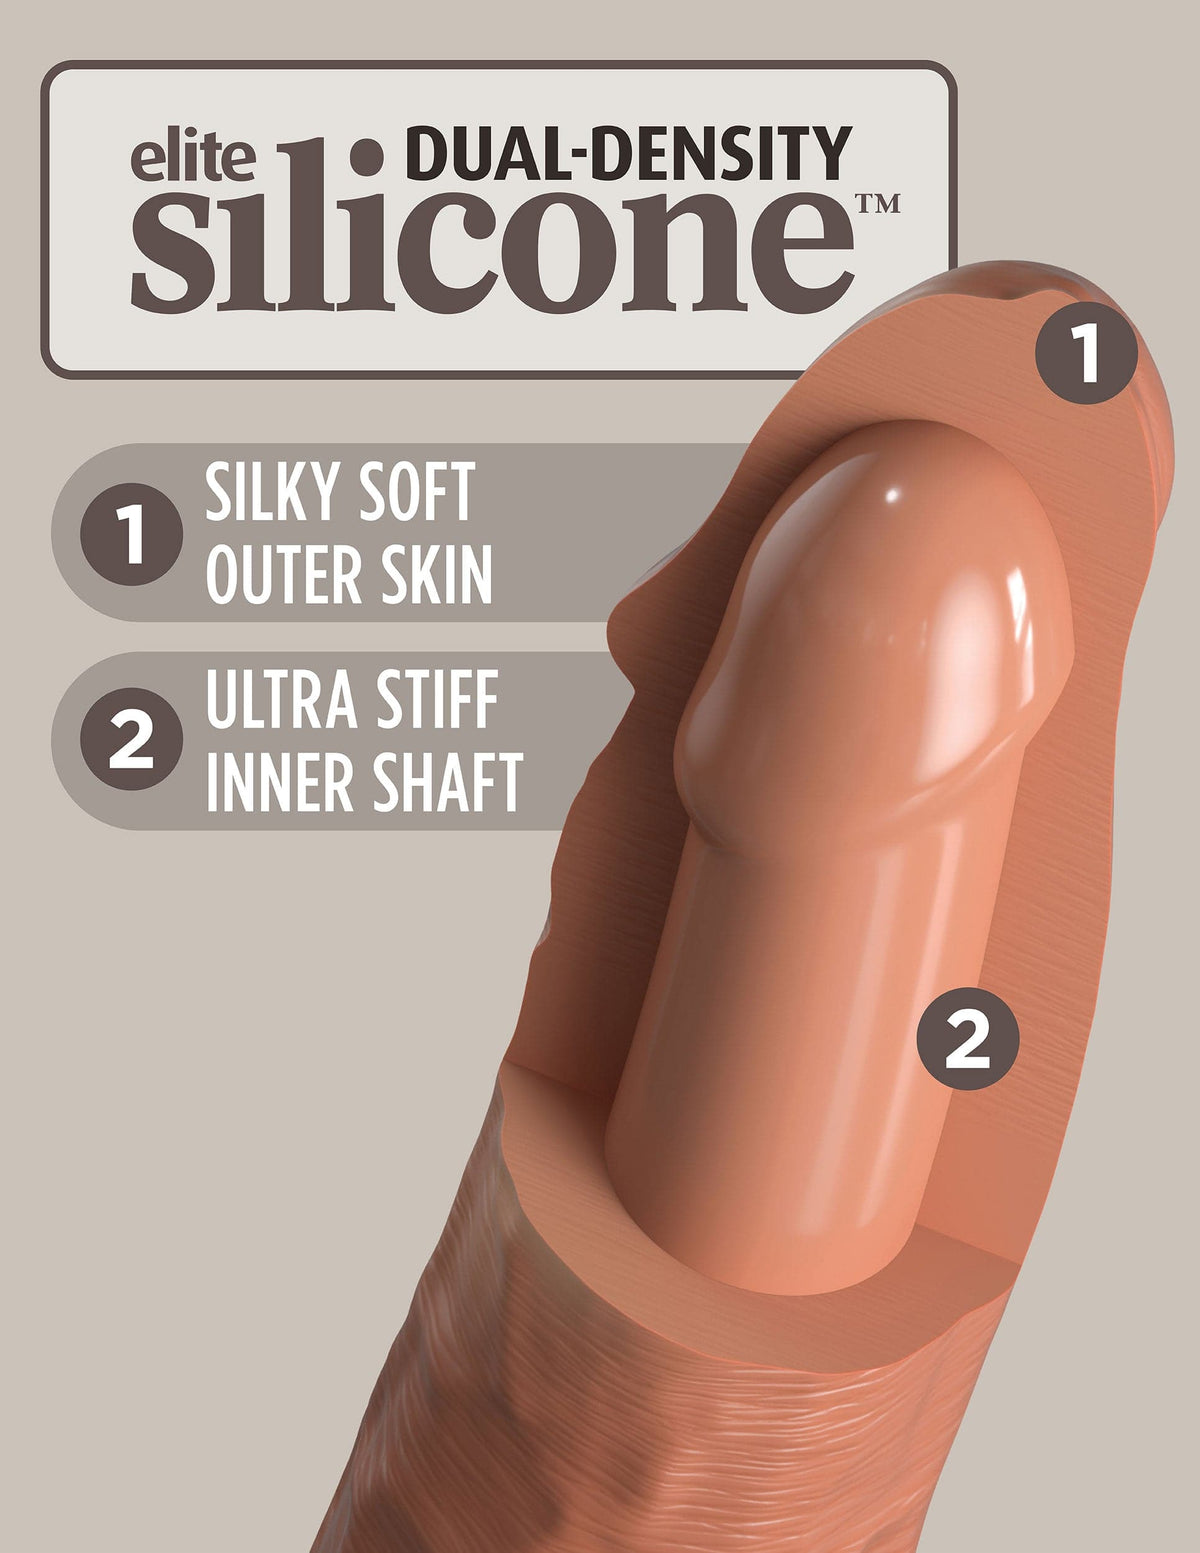 king cock elite comfy silicone body dock kit harness and 7 inch dildo tan